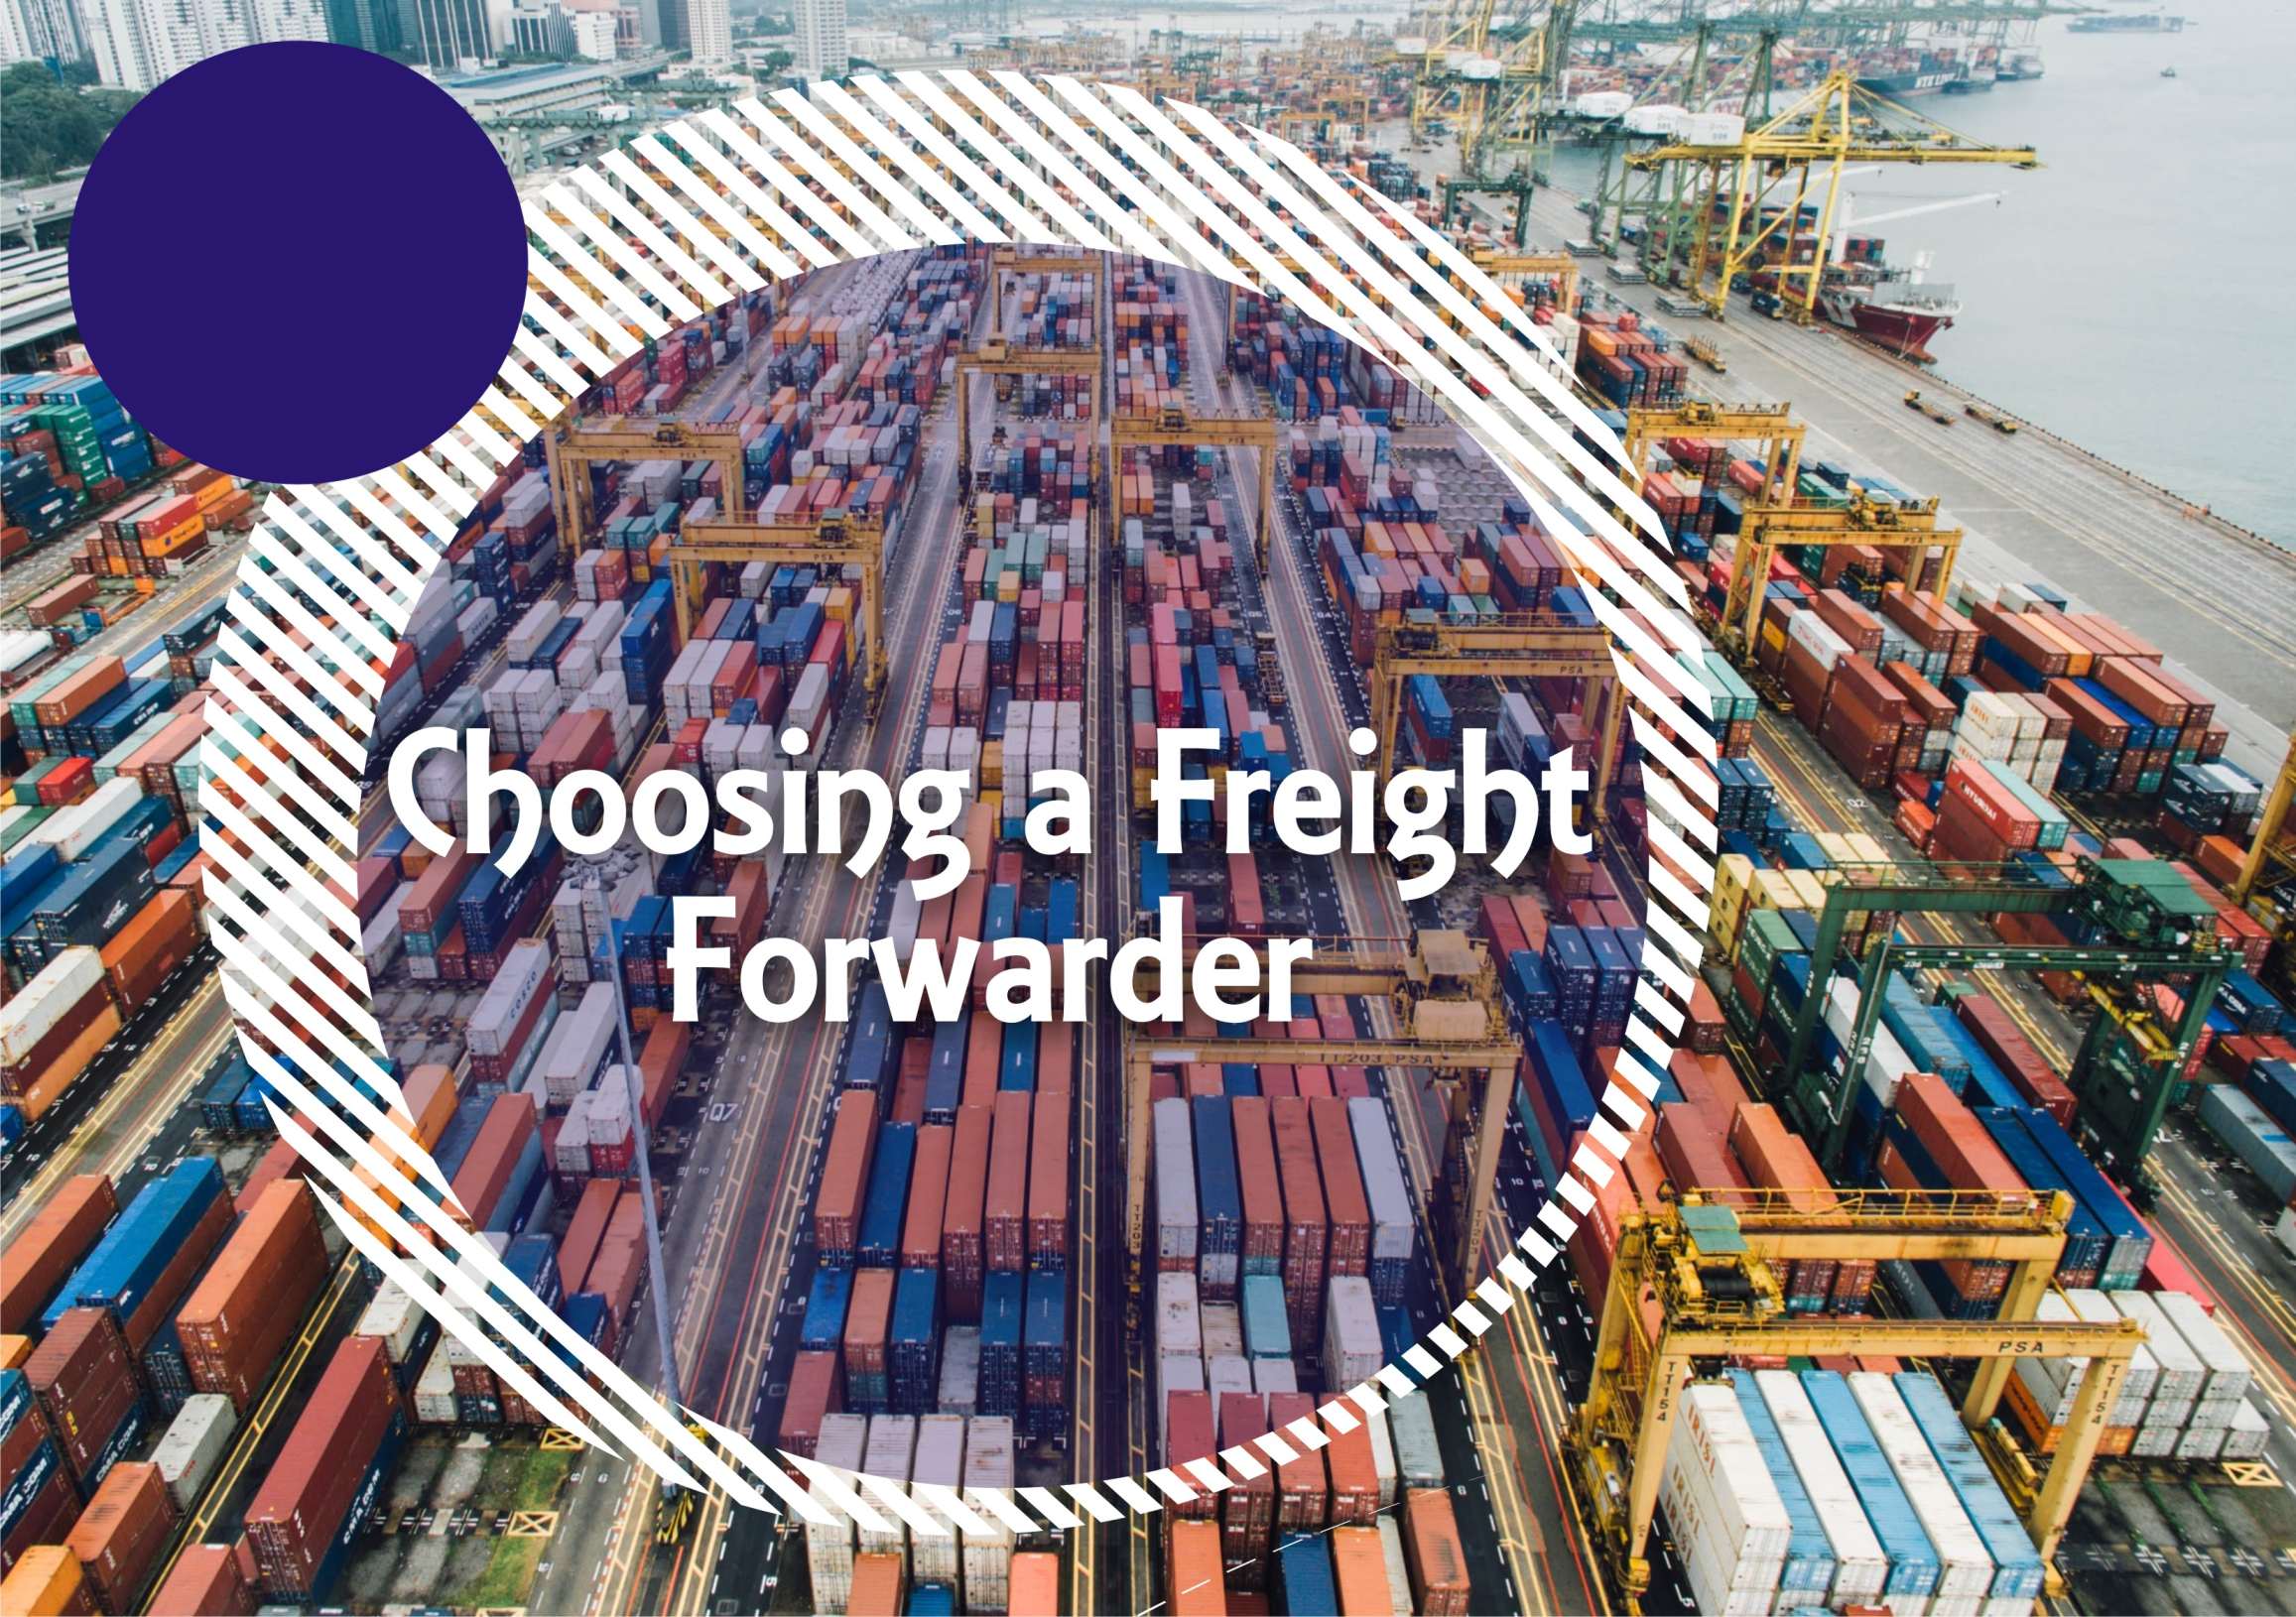 Things to consider when choosing a freight forwarder